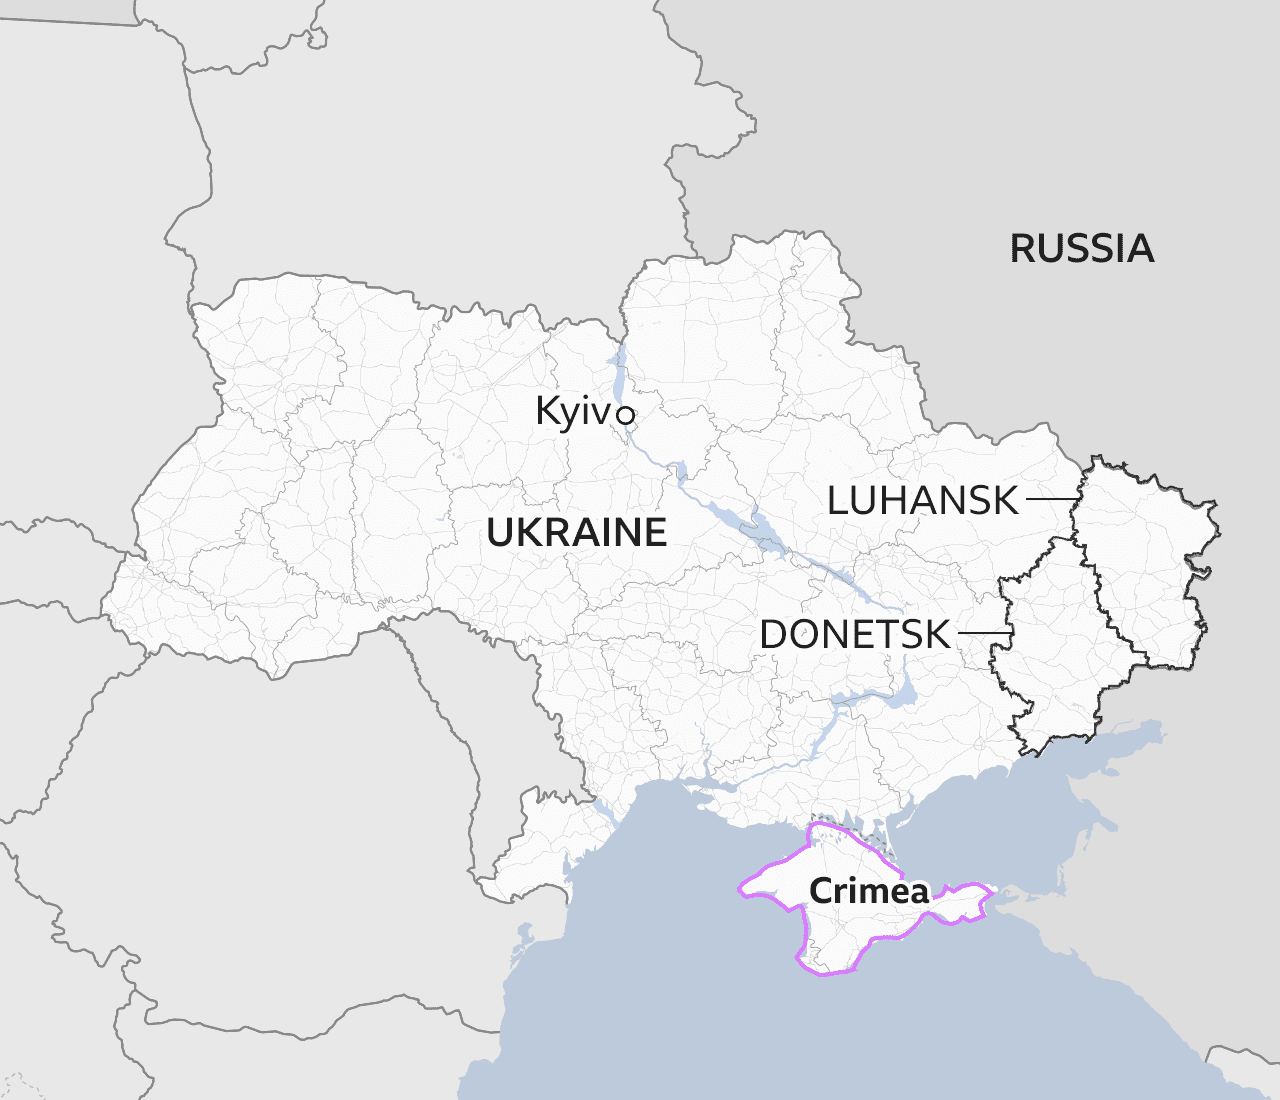 Map showing the Luhansk and Donetsk regions in eastern Ukraine